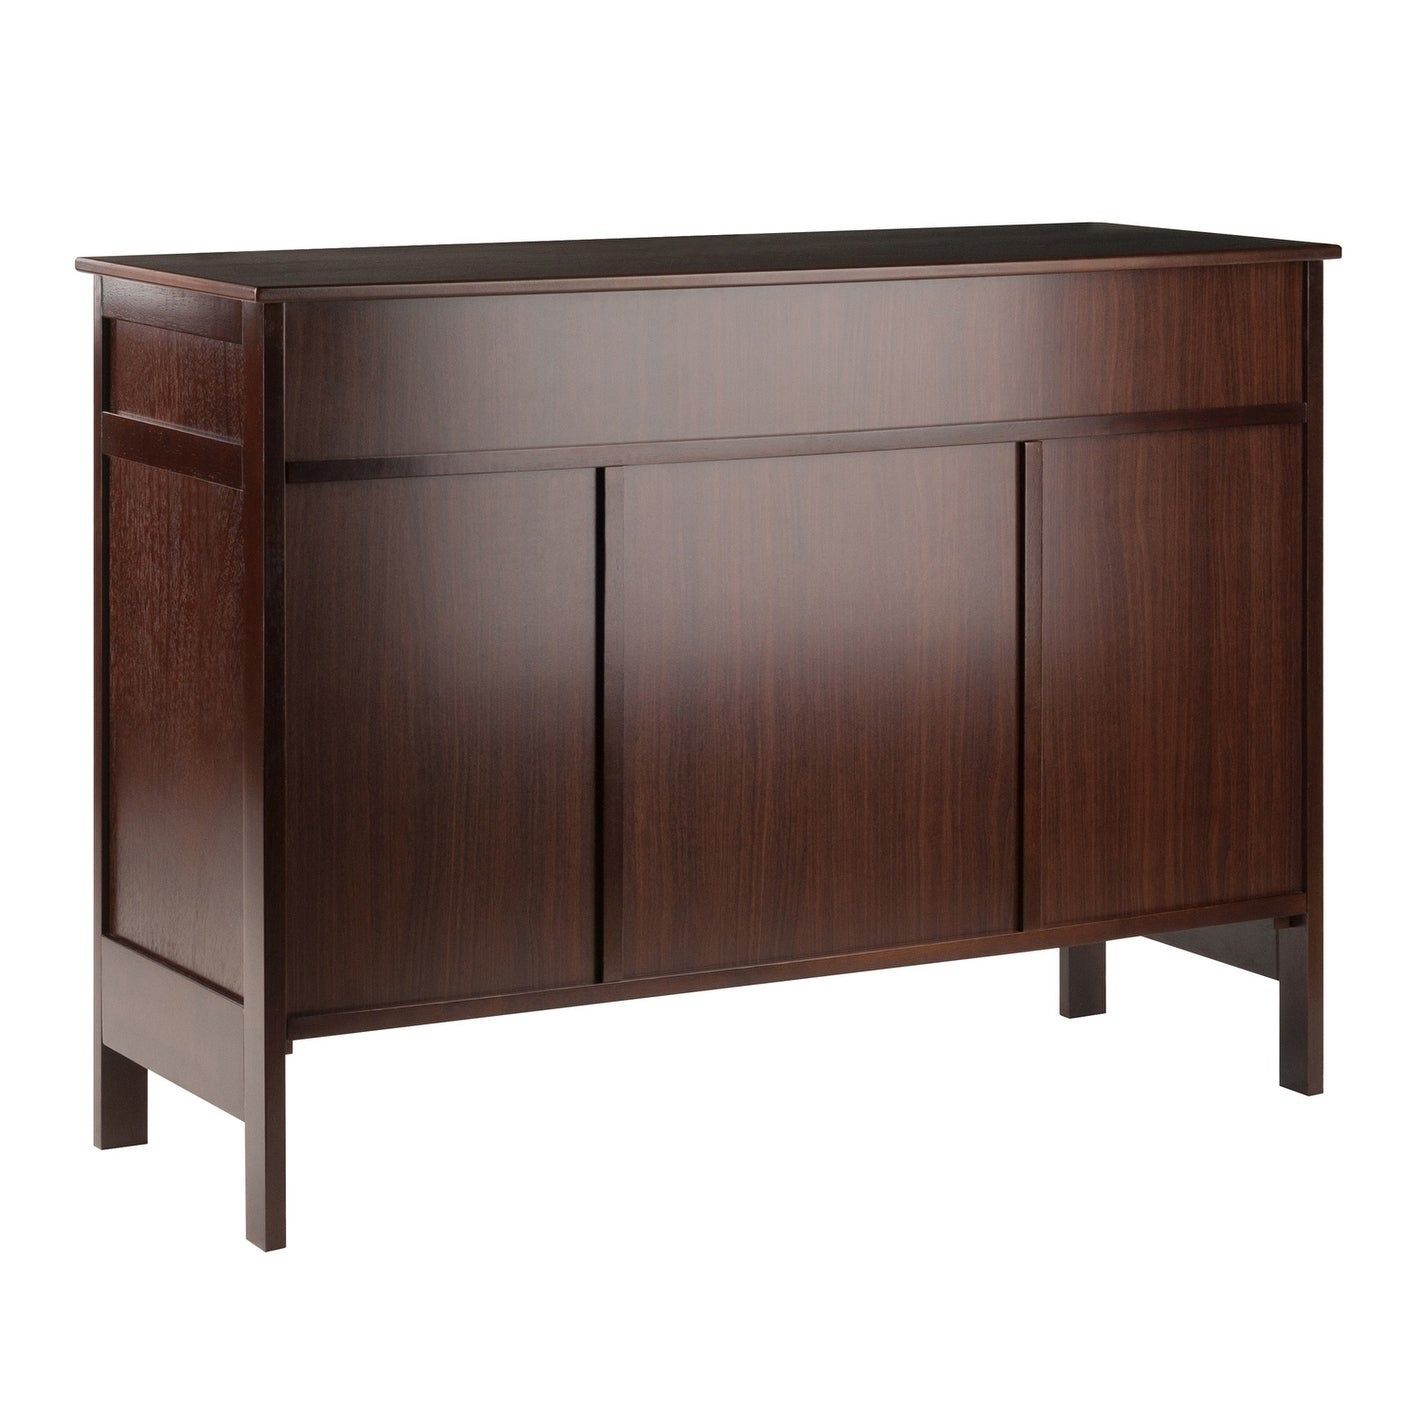 Winsome Gordon Solid And Composite Wood Buffet Cabinet/sideboard In  Cappuccino Finish In Solid And Composite Wood Buffets In Cappuccino Finish (View 2 of 30)